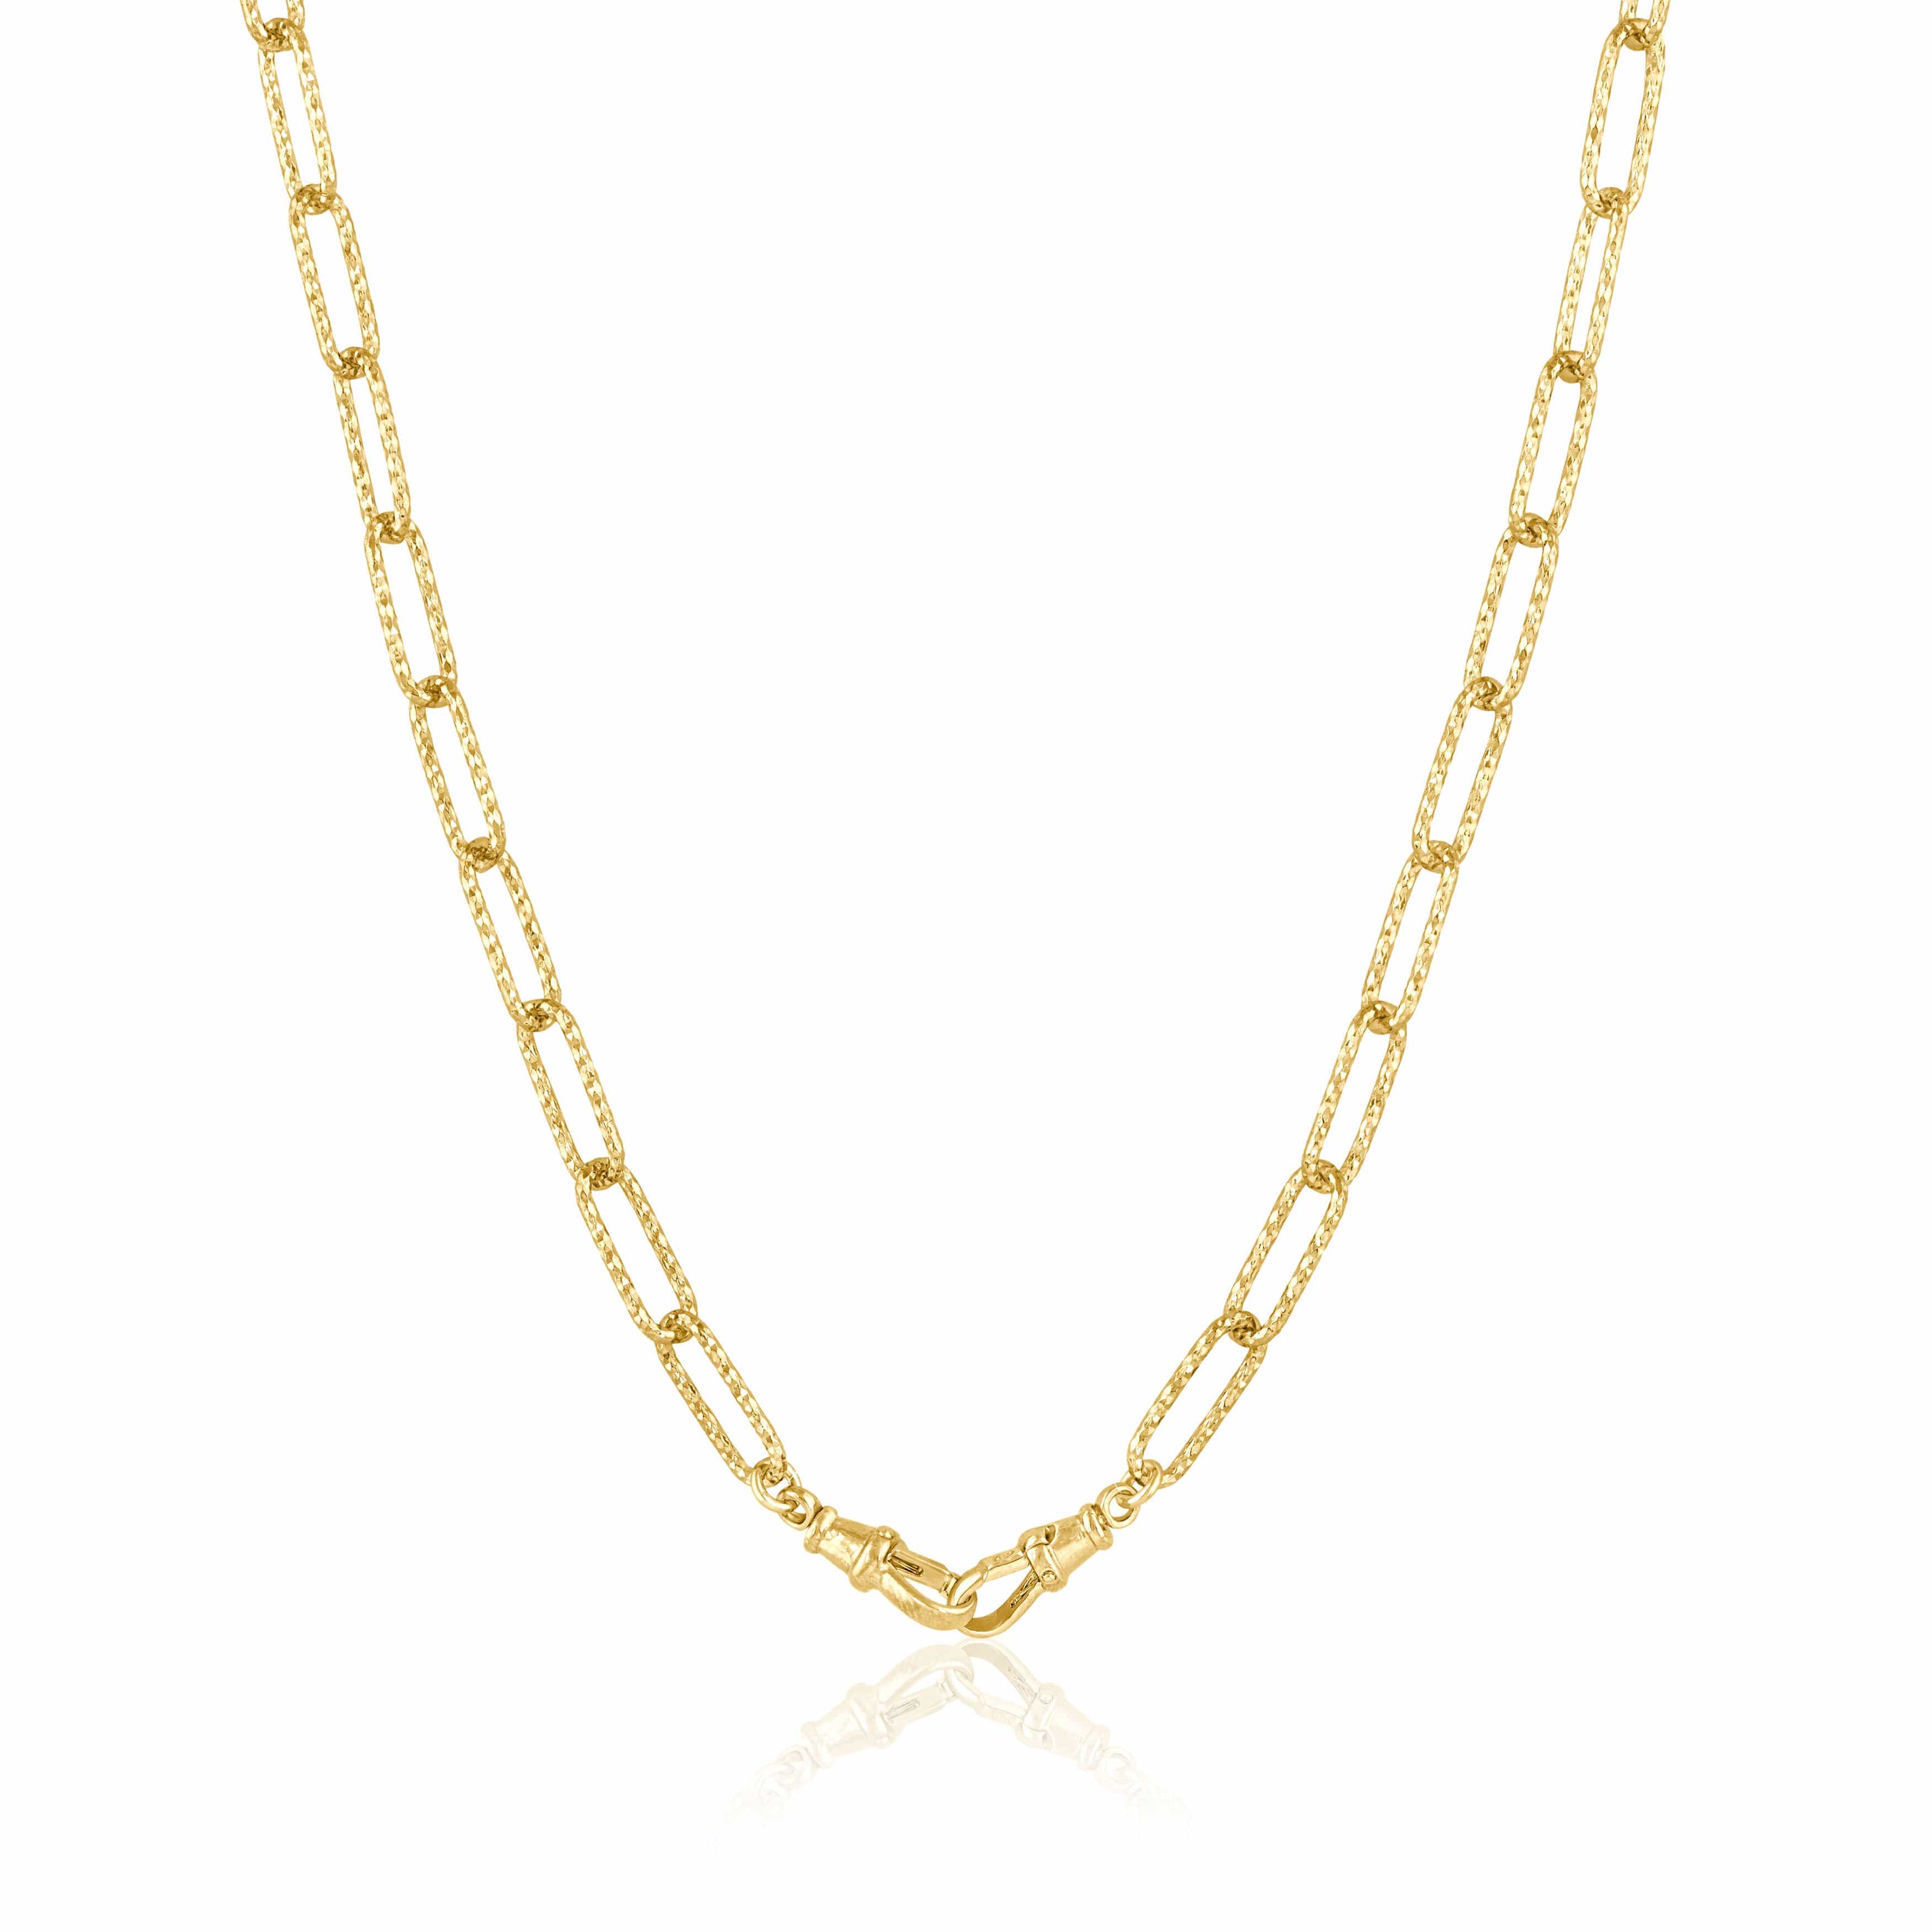 Double Clasp Necklace Heavy Sparkle Chain / 14K Yellow Gold Plate